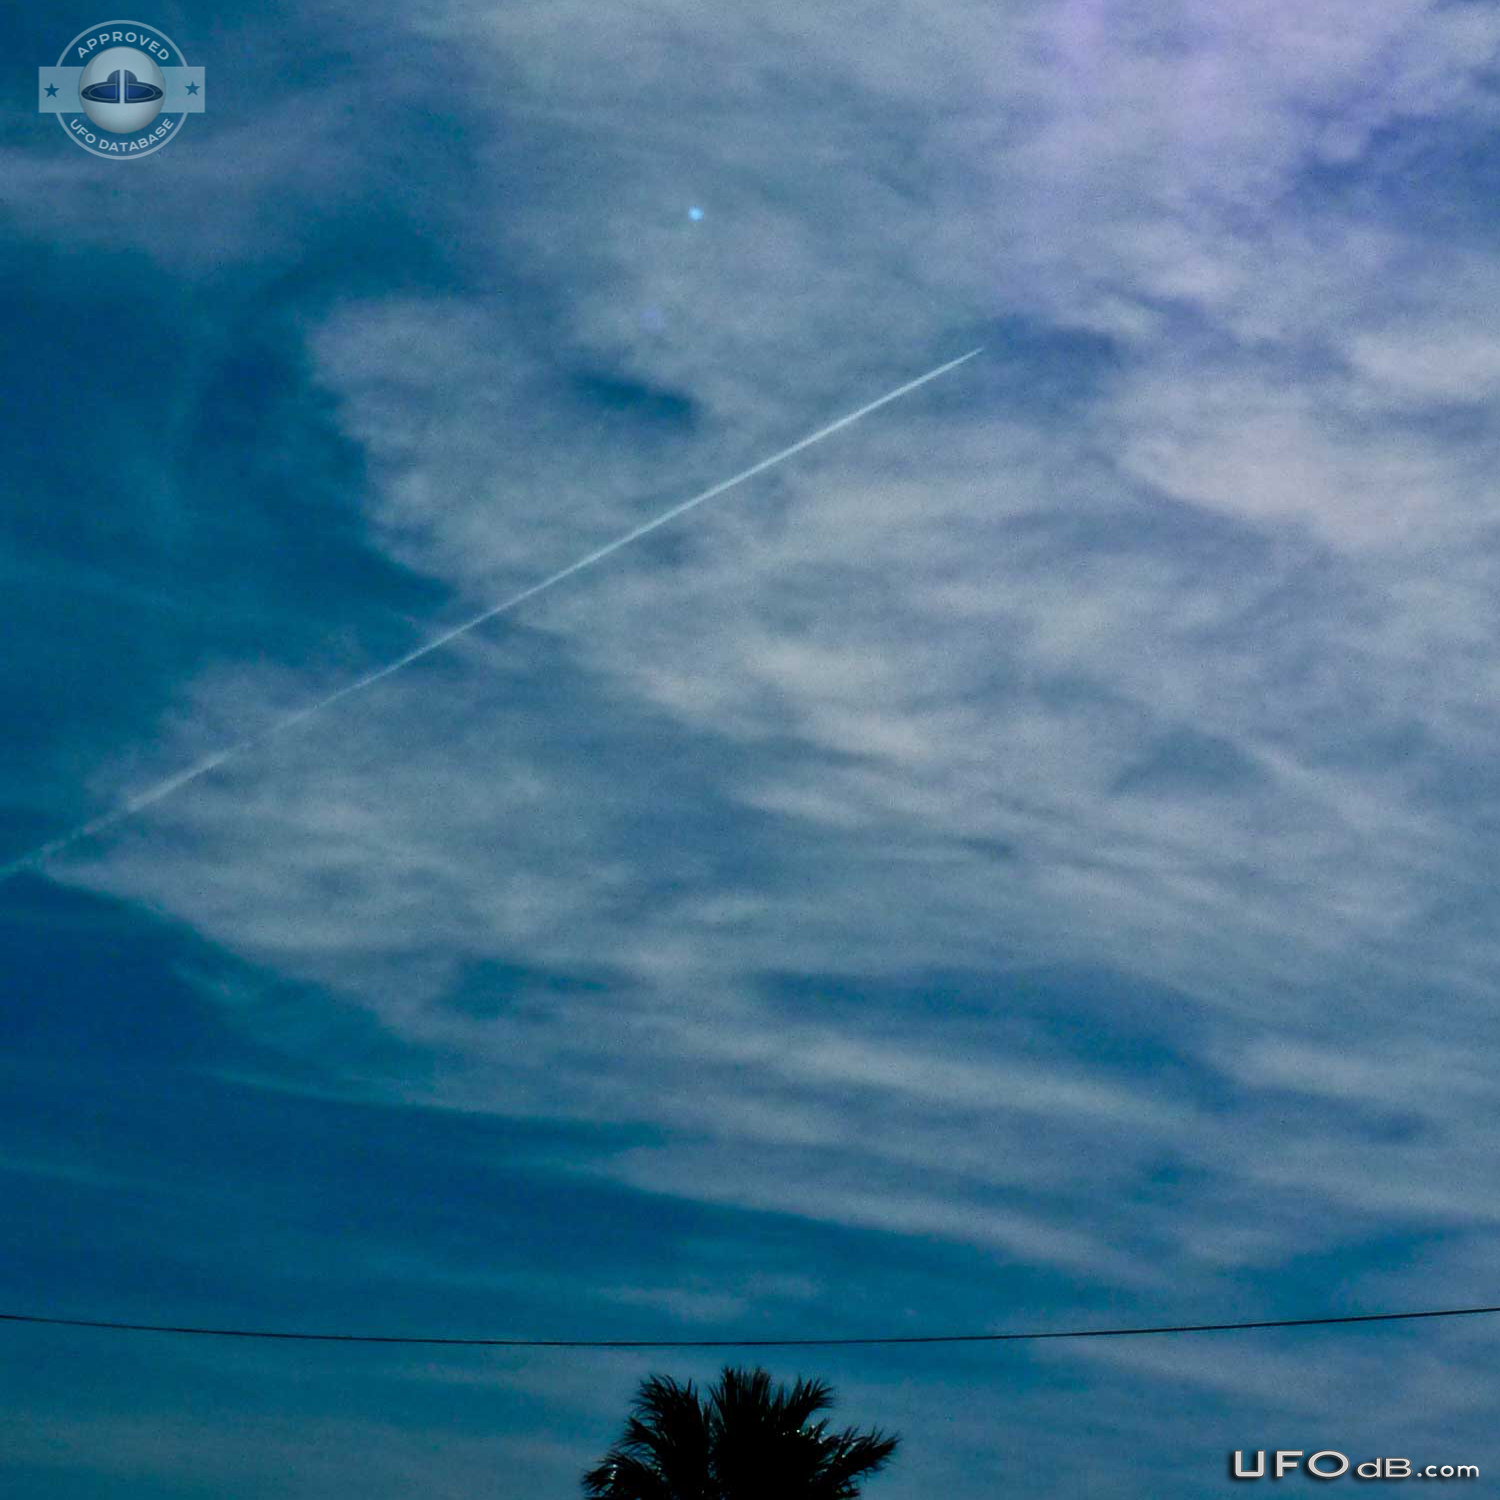 Sphere UFO caught on picture near chemtrail in Albania - October 2011 UFO Picture #374-2